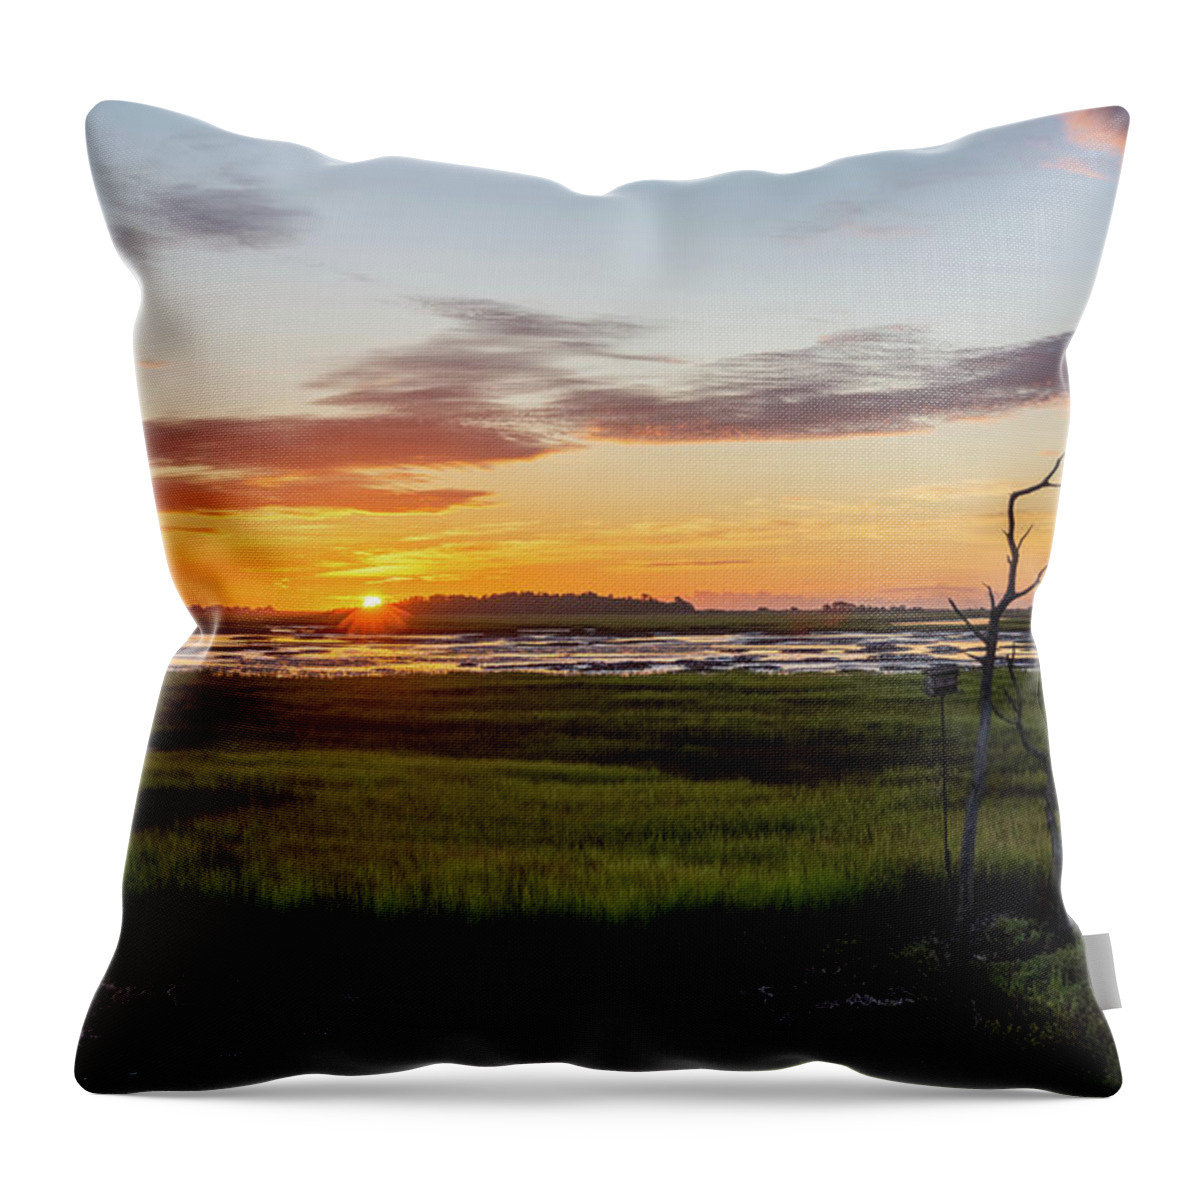 Sunrise Throw Pillow featuring the photograph Murrells Inlet Sunrise - August 4 2019 by D K Wall